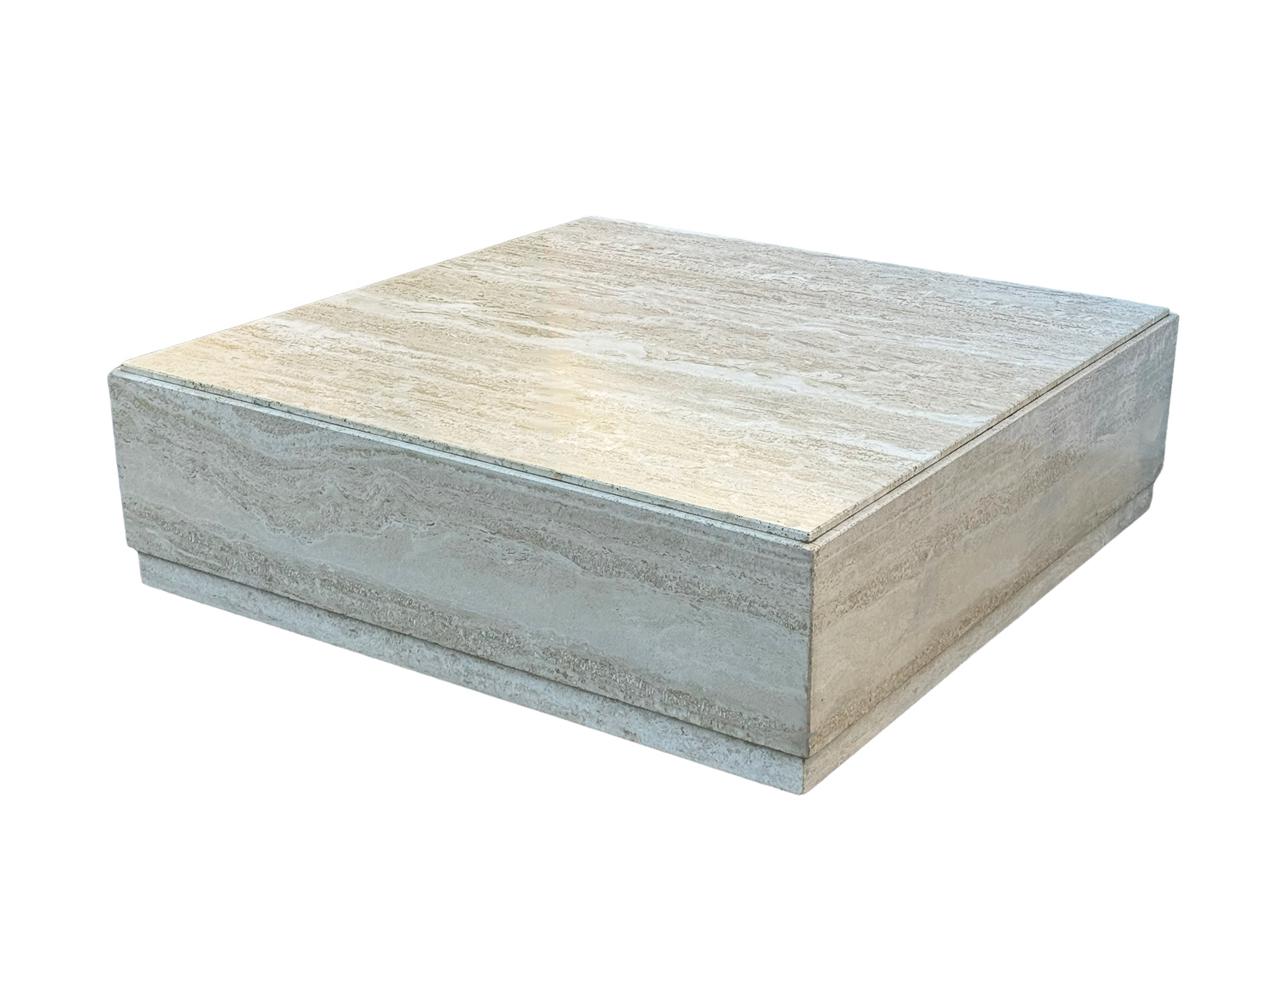 Low Midcentury Italian Modern Square Travertine Marble Cube Cocktail Table  en vente 2